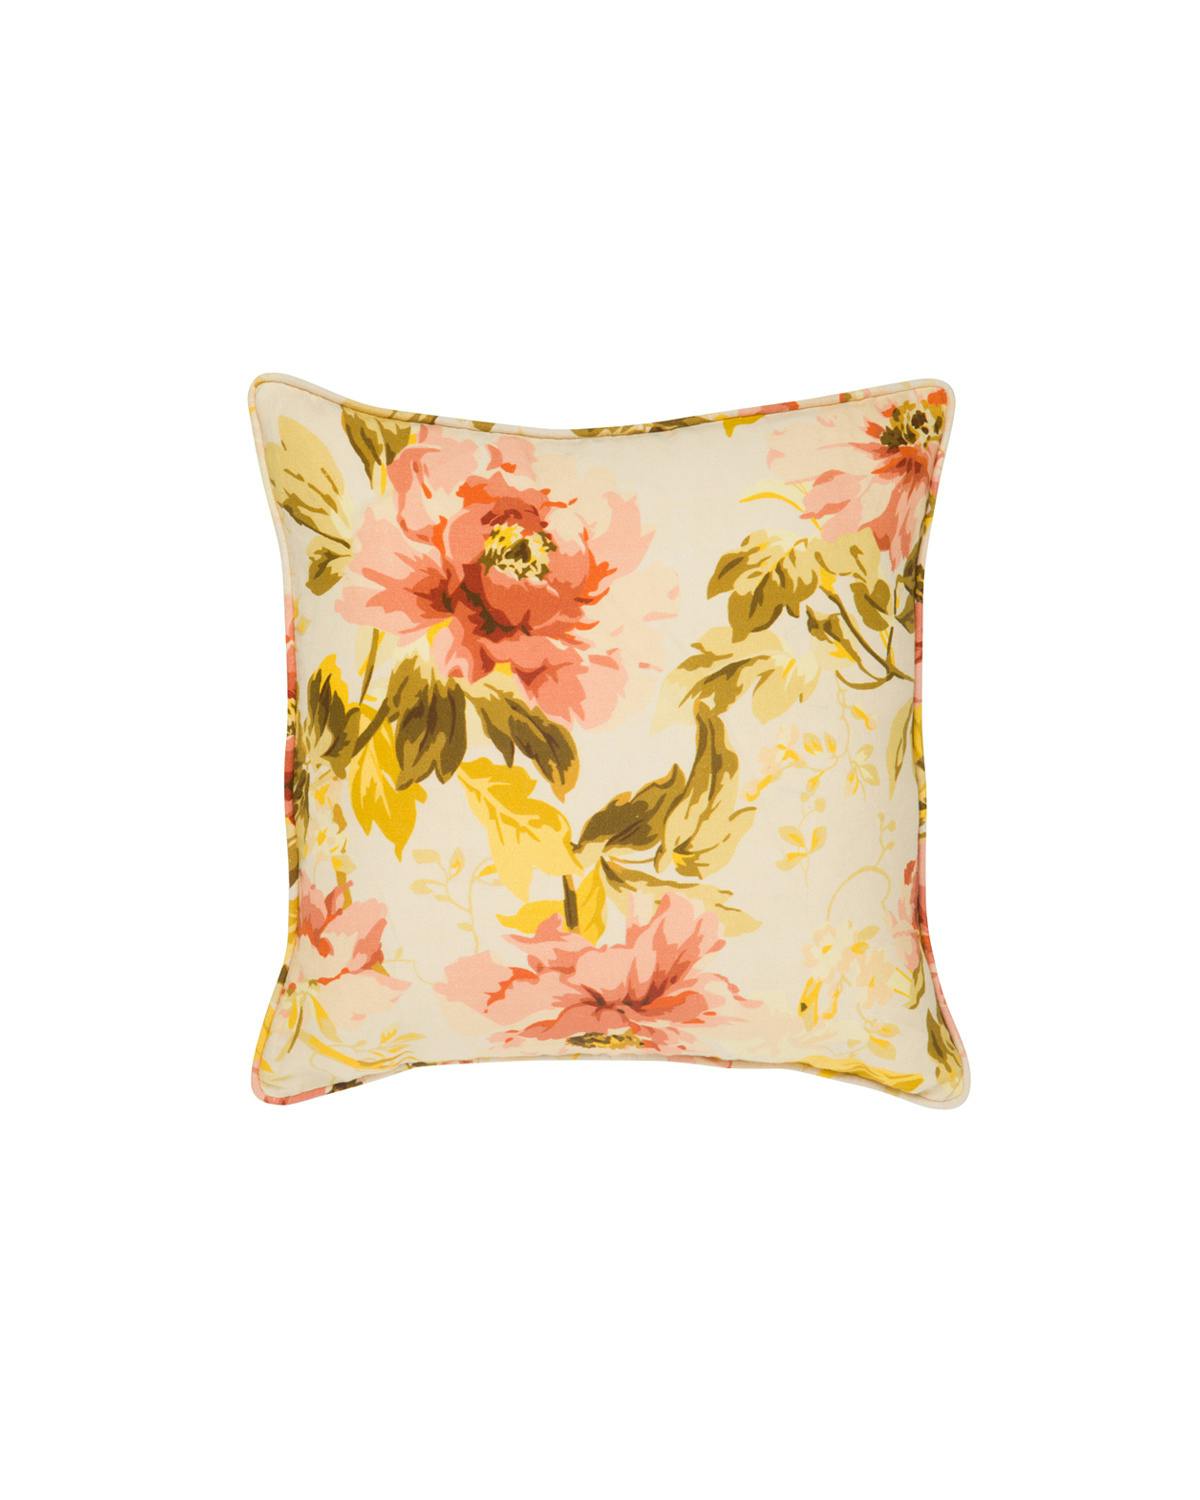 Cushion Cover Linen 50x50 cm, Blooming. Image #1